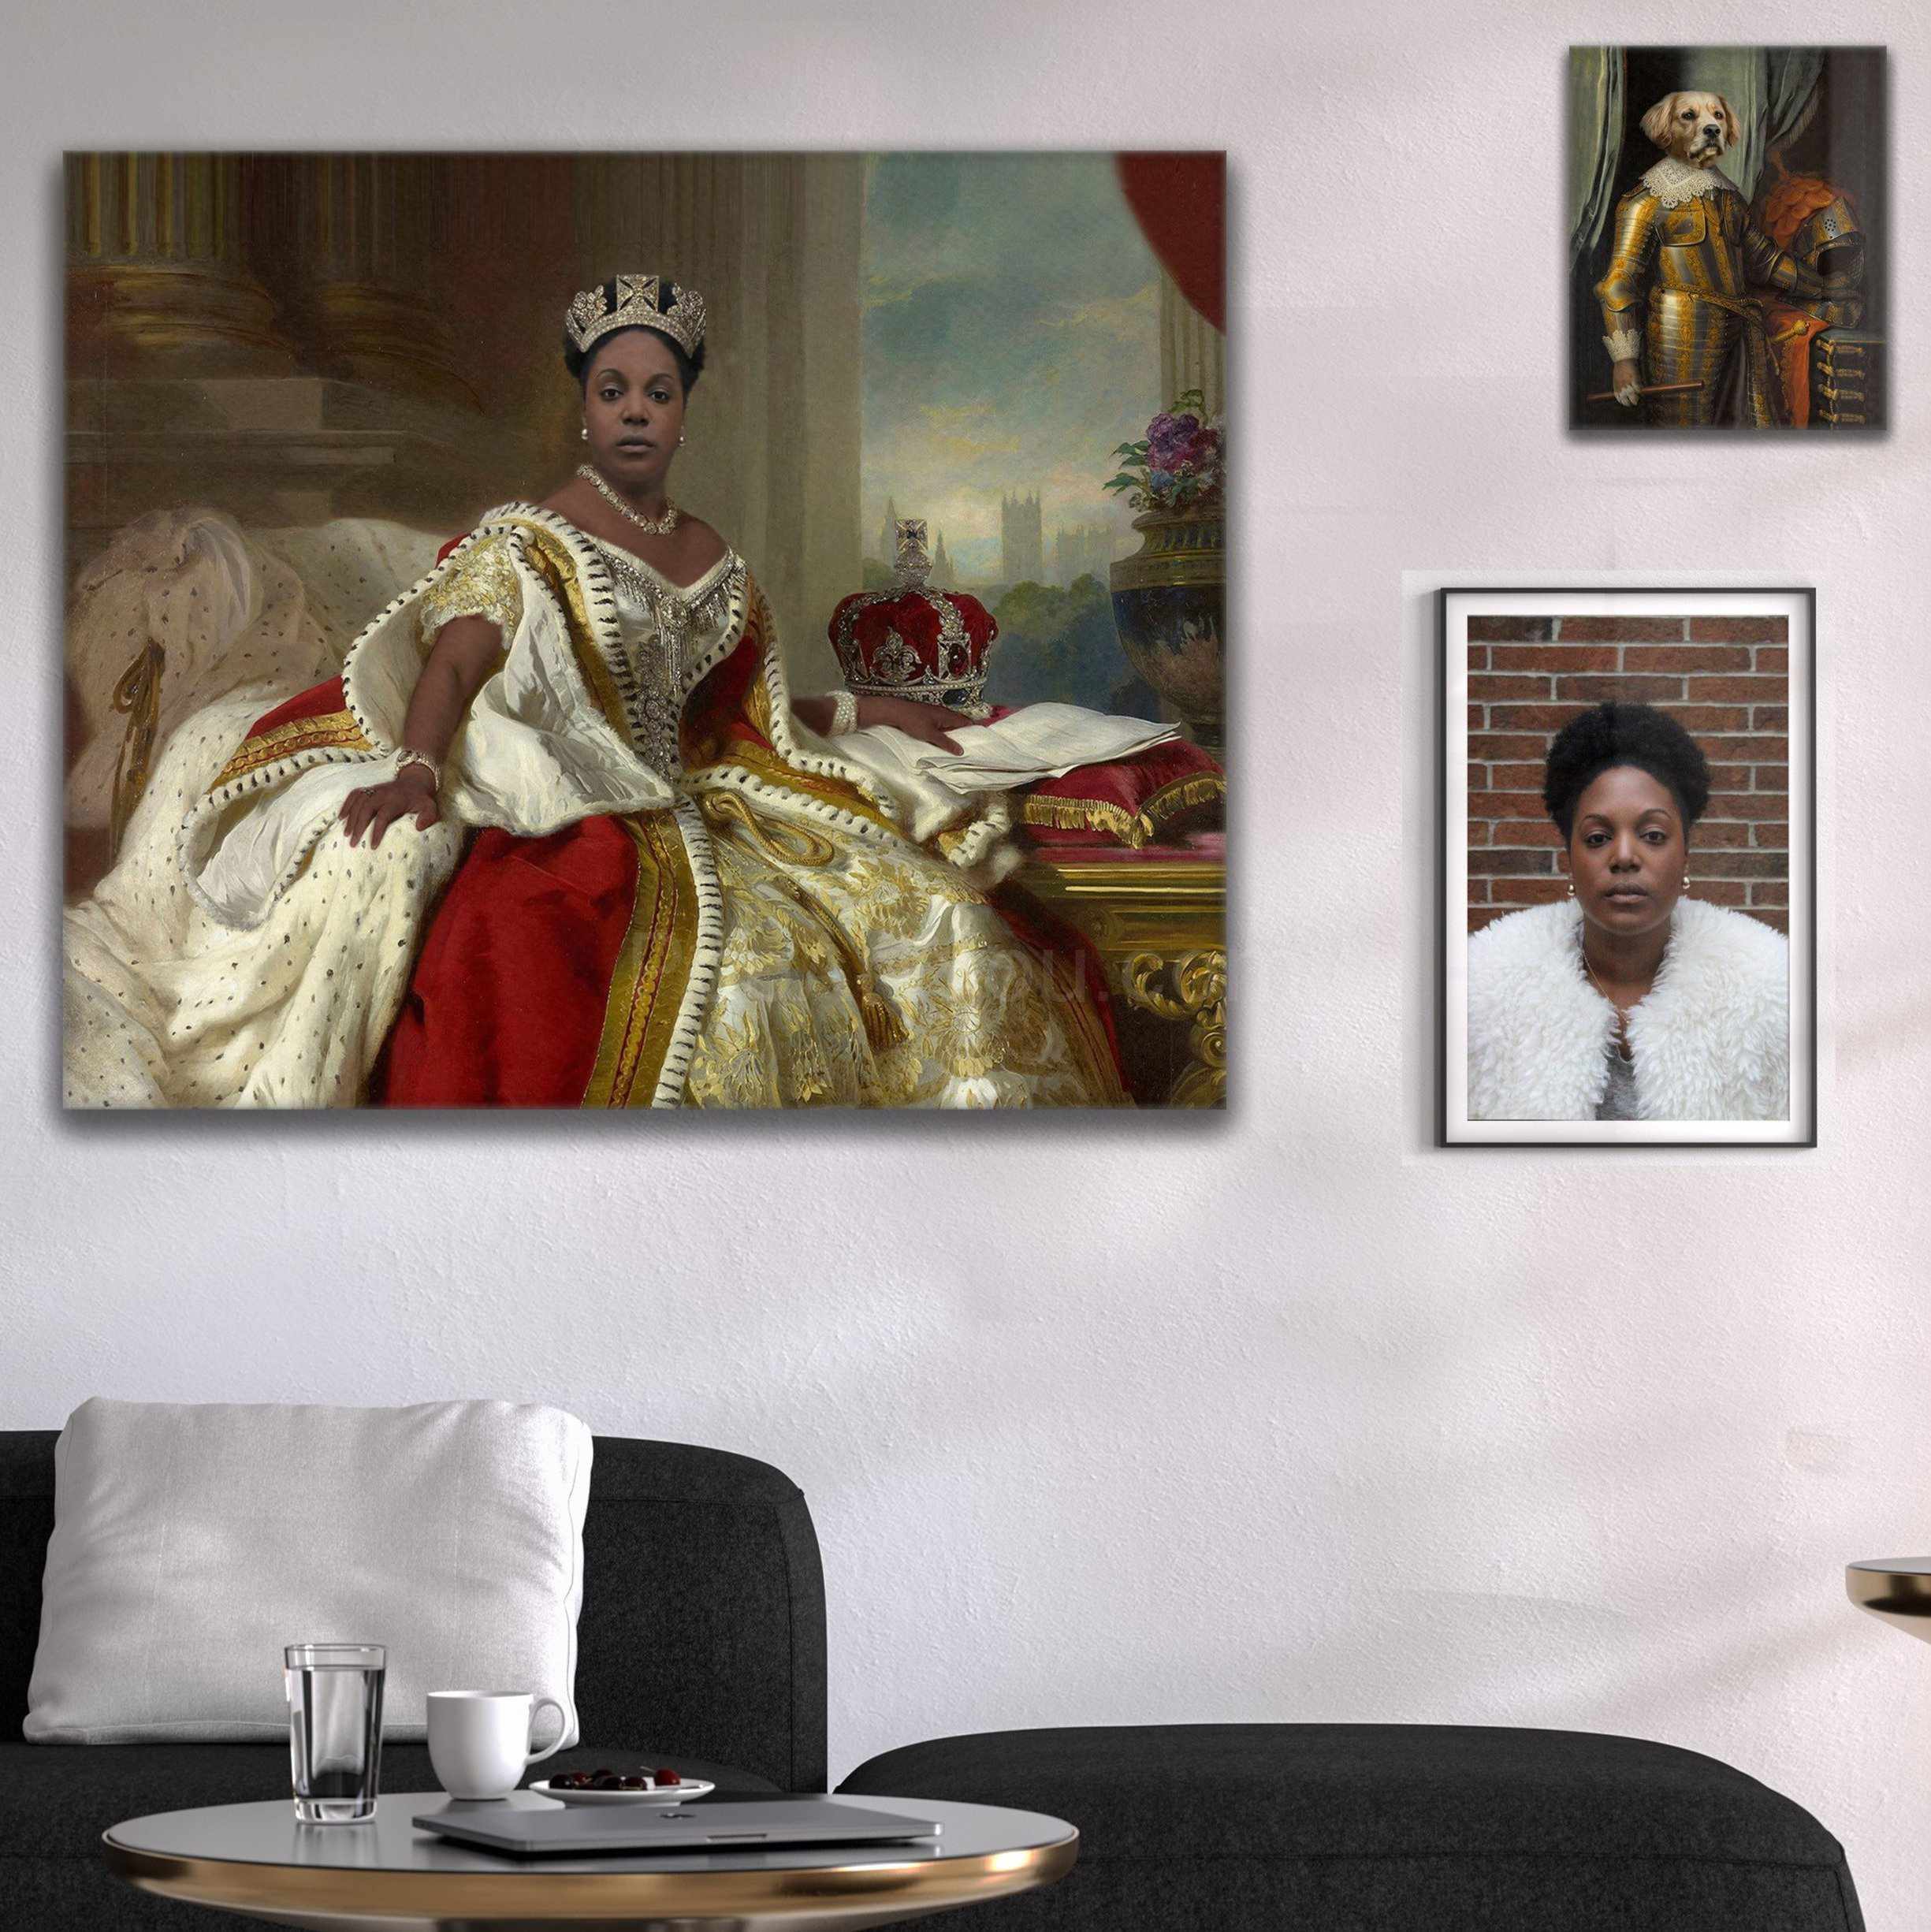 Portrait of a girl dressed in a royal dress hanging on a white wall over a gray sofa